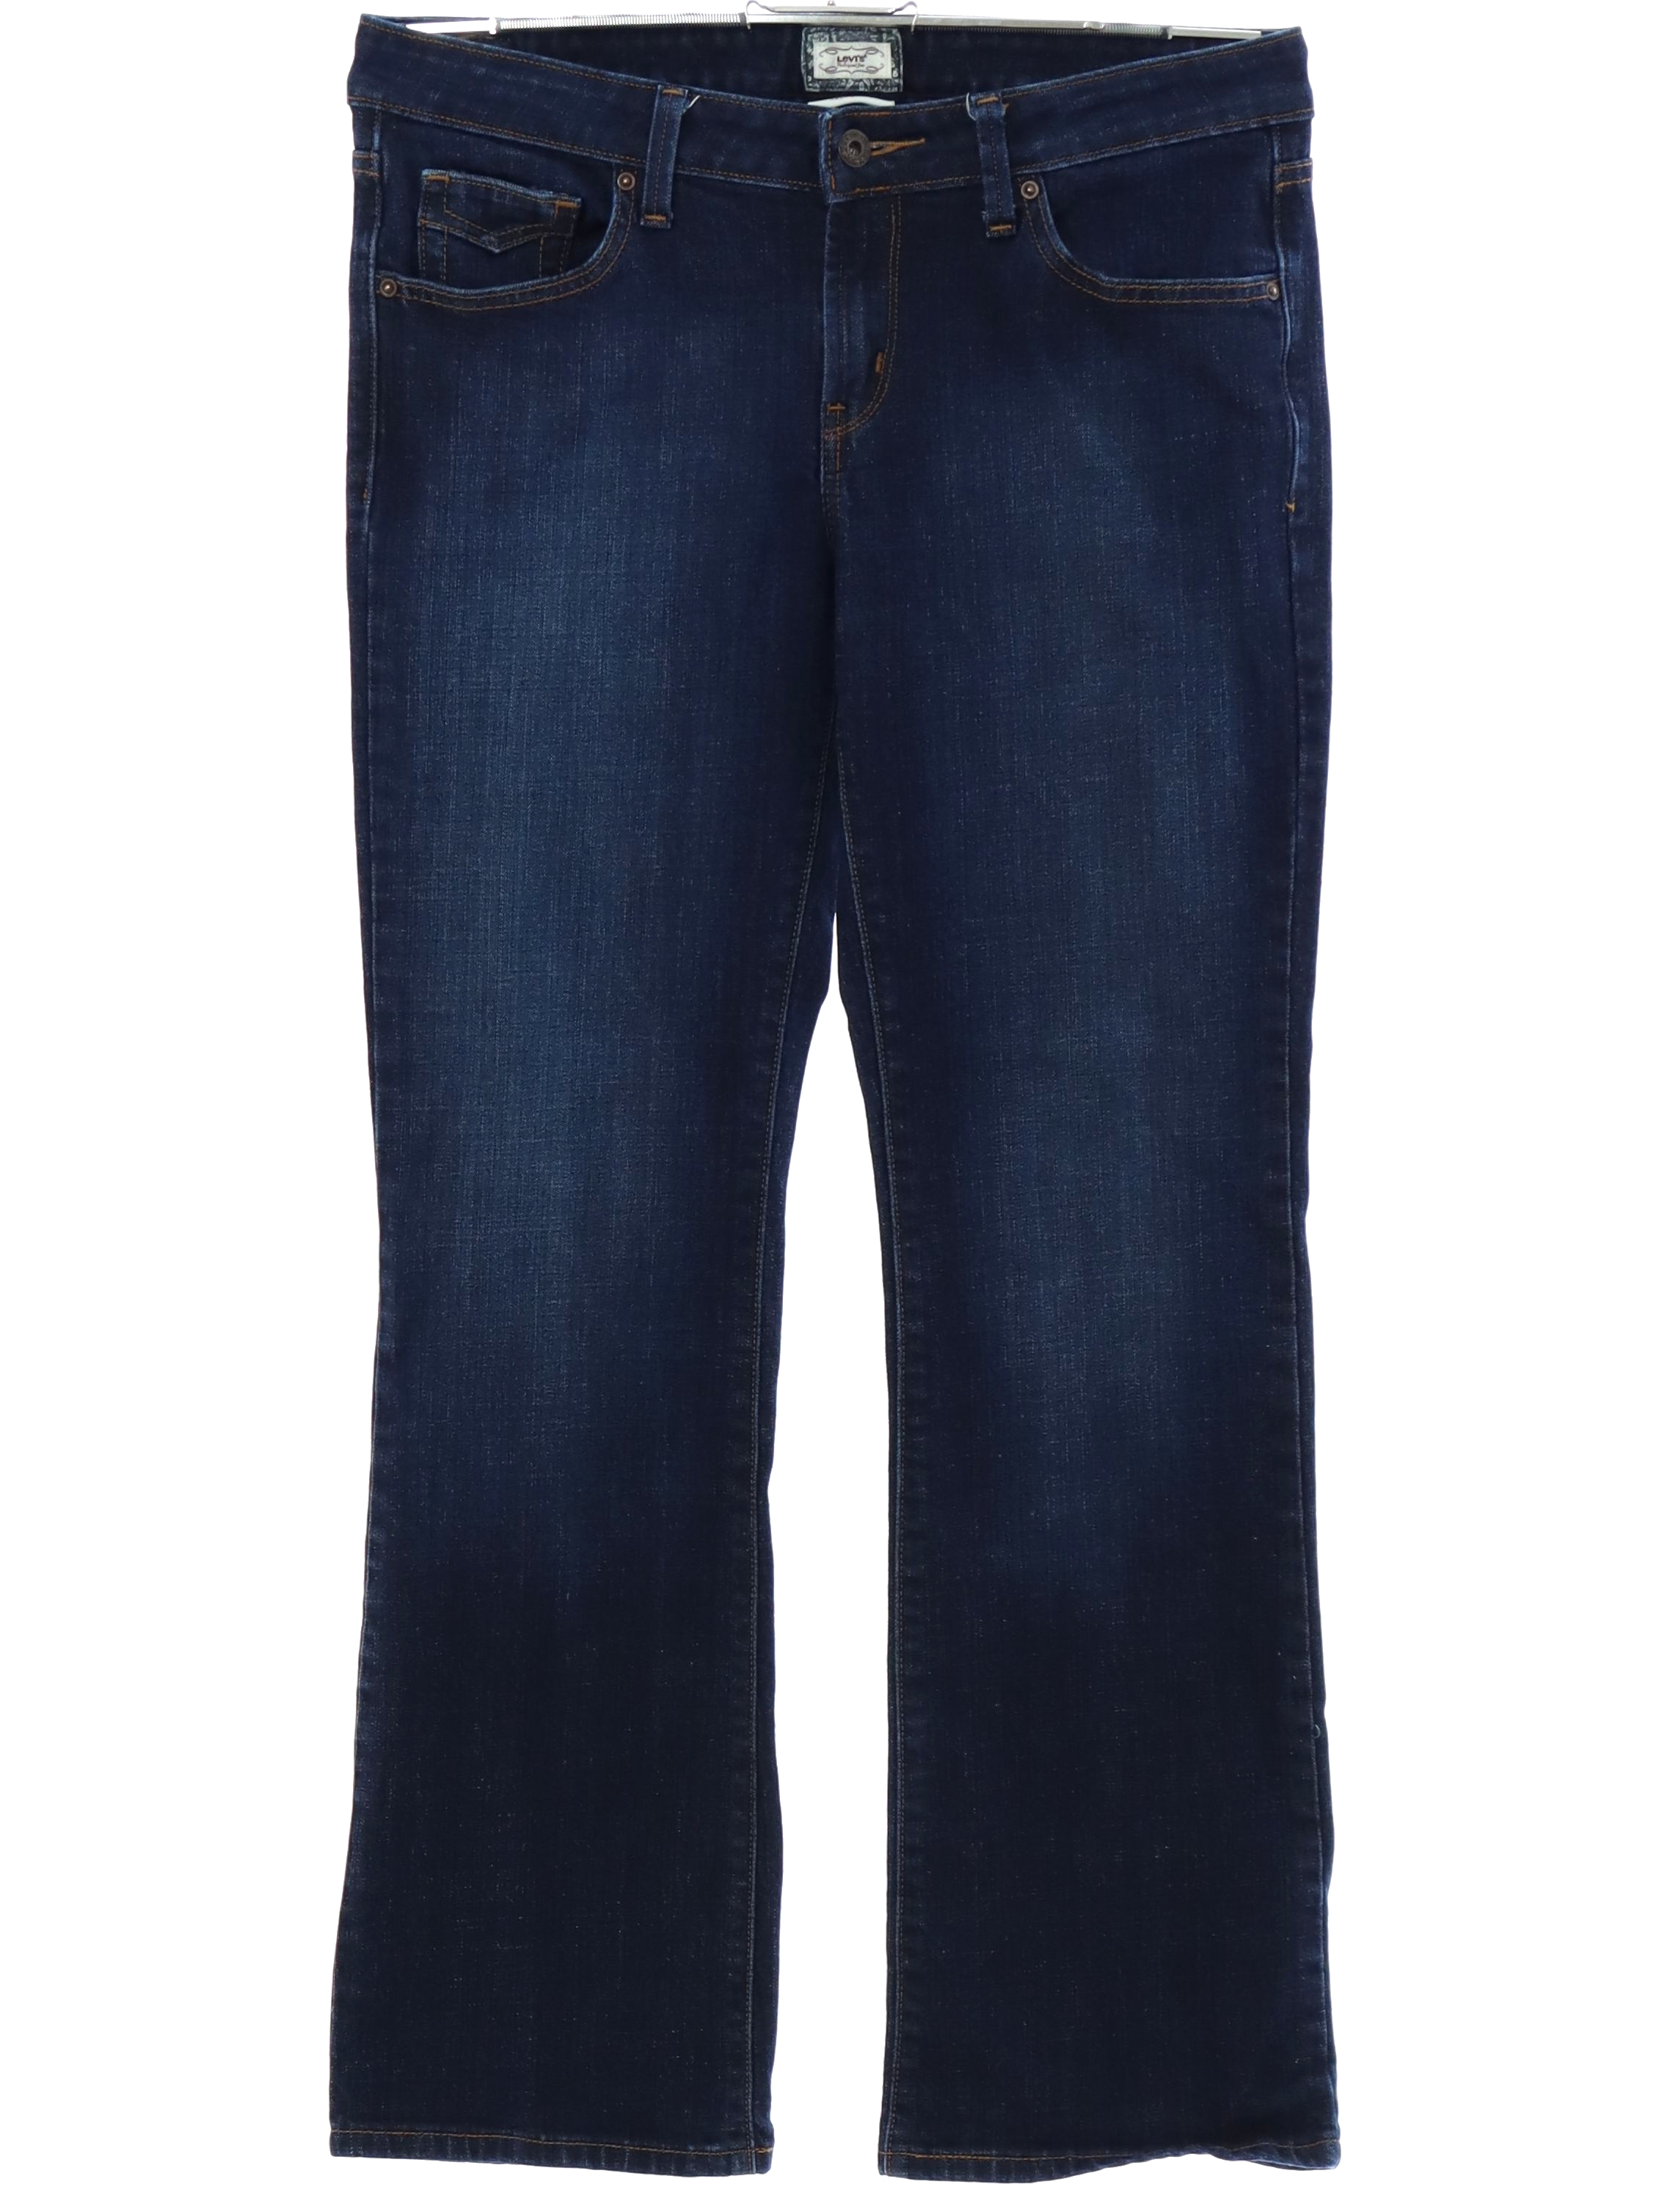 Flared Pants / Flares: 90s (2010) -Levis Womens dark blue background cotton and elastane denim with dark topstitching, style 545 pocket low rise 18 inch flared jeans pants with